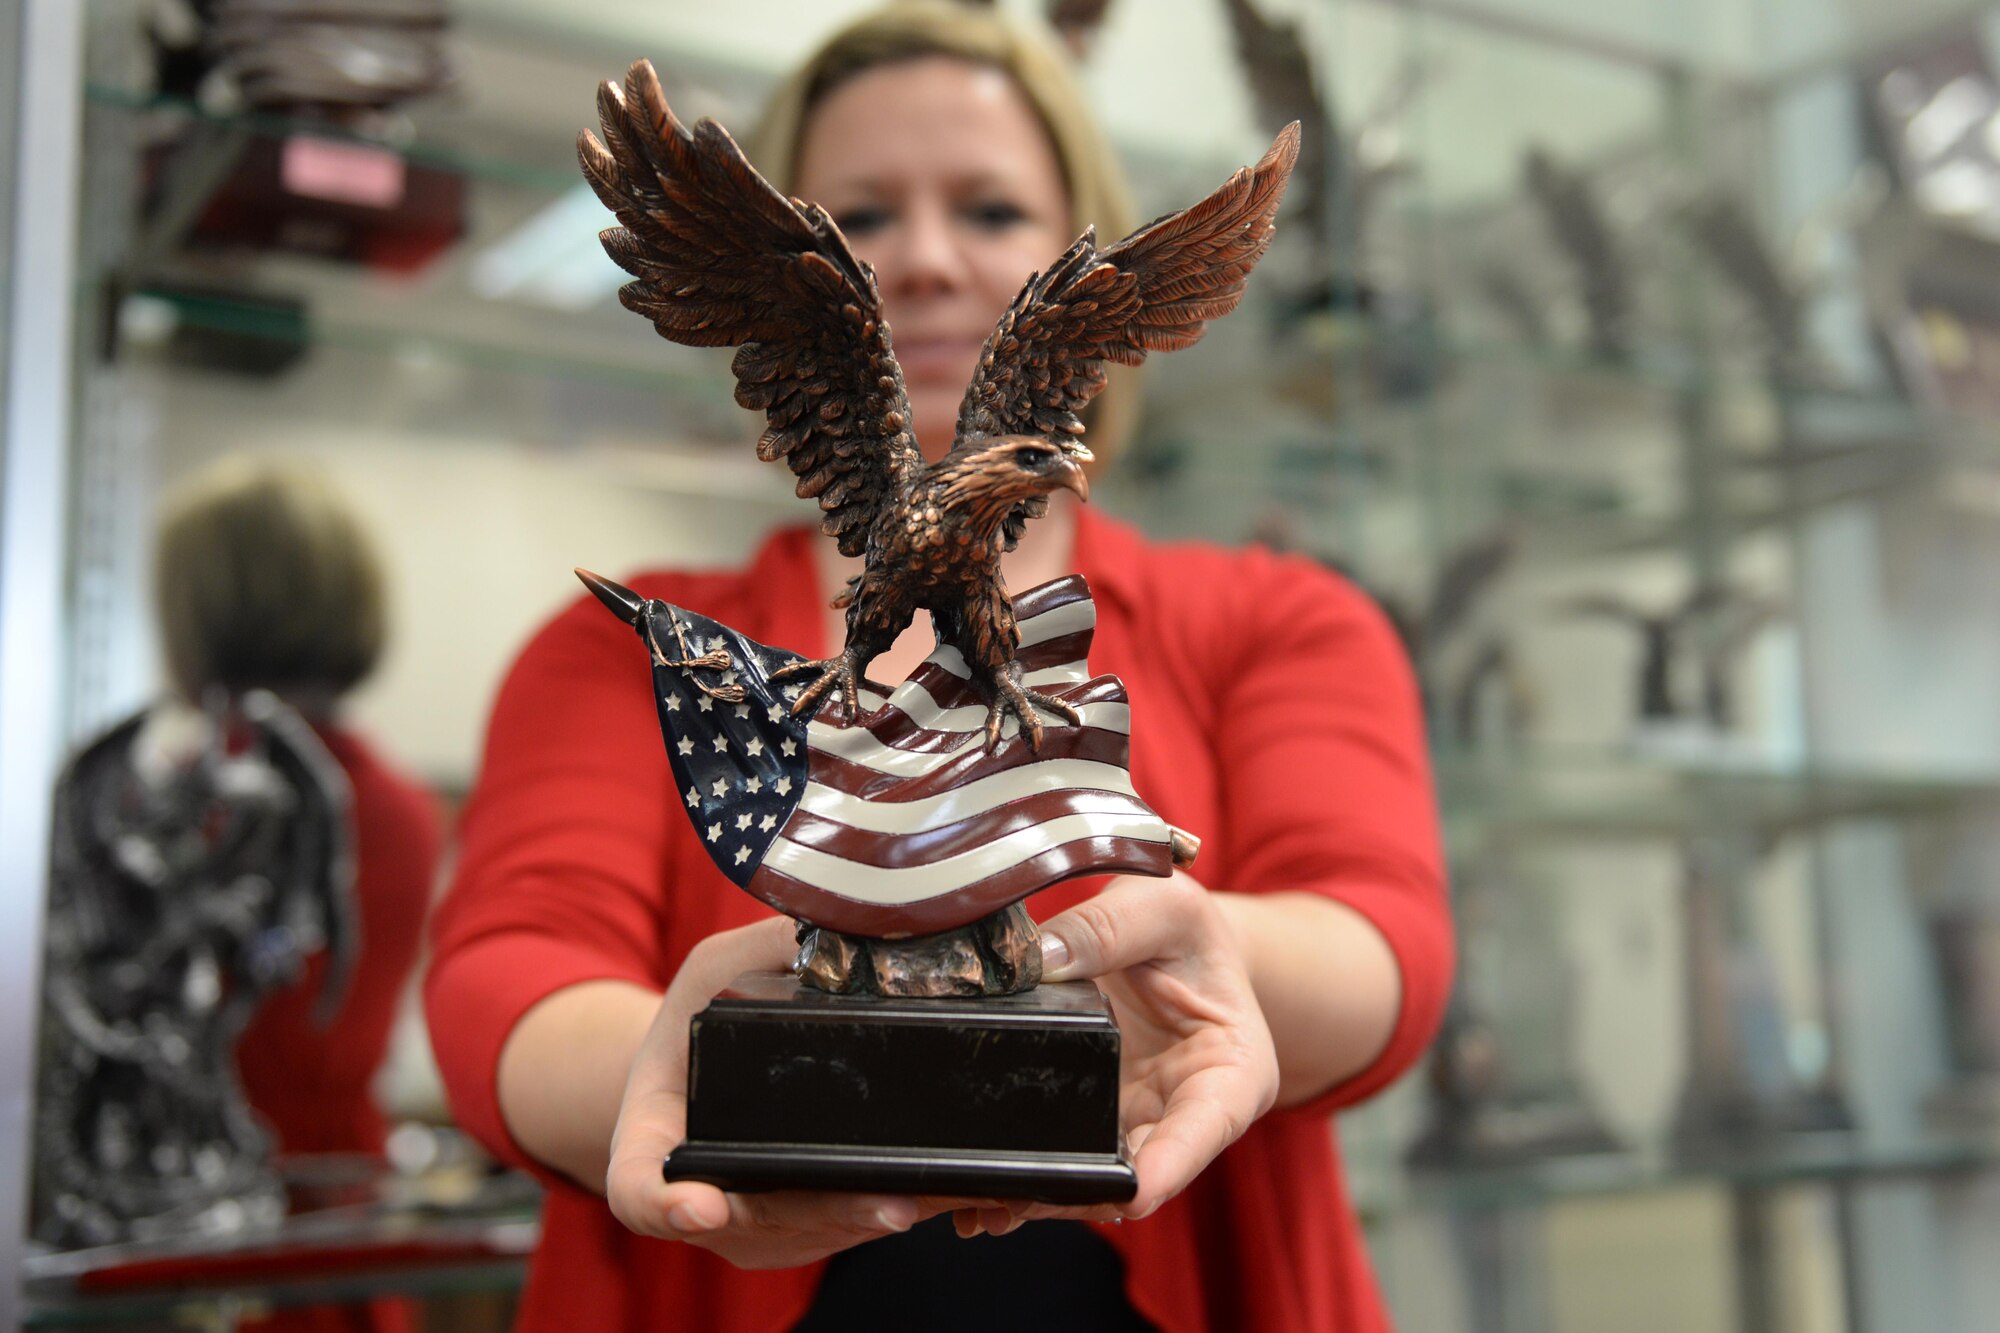 Hope Holden, Arts and Crafts Center manager, displays a trophy Feb. 2, 2016, Keesler Air Force Base, Miss. The awards and engraving shop has hundreds of trophies and plaques that can be personalized in their L.A.S.E.R. engraver. (U.S. Air Force photo by Airman 1st Class Travis Beihl)